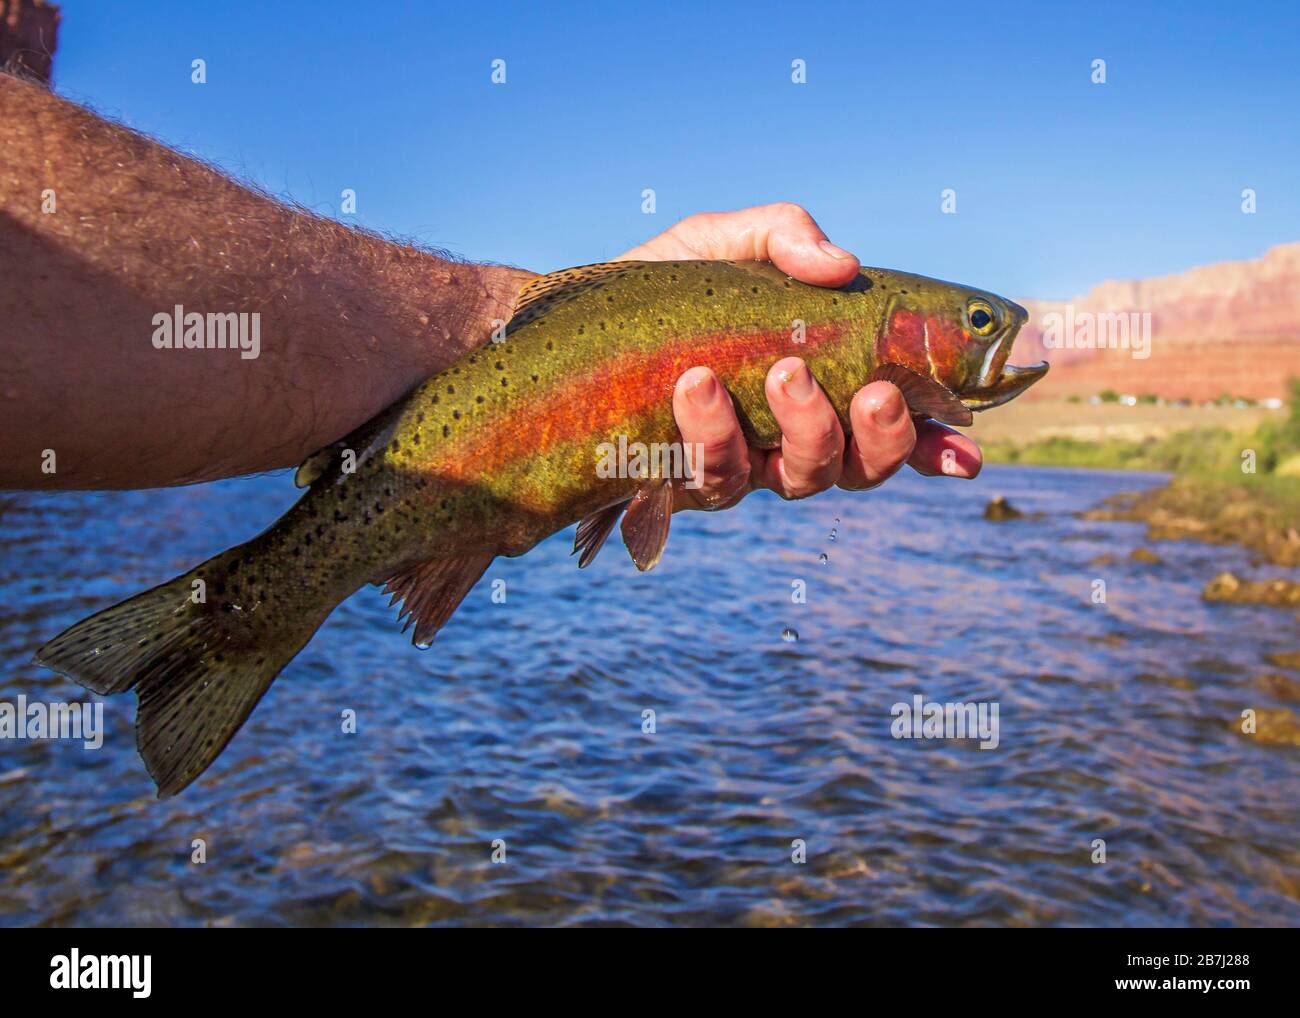 Angler holding a vibrant colored rainbow trout caught fly fishing on Colorado river at Lee's Ferry AZ. Stock Photo